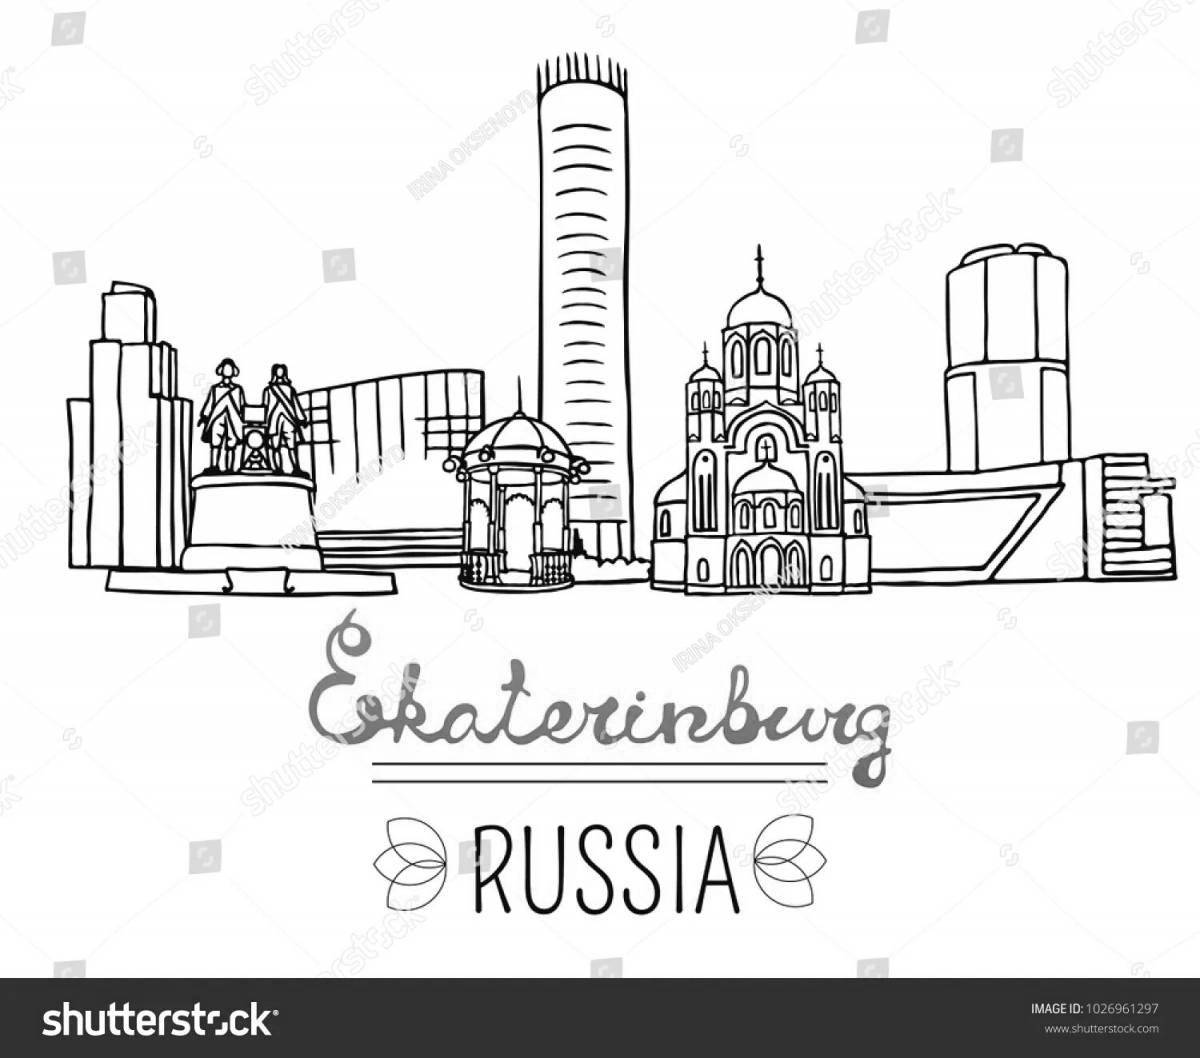 Merry Yekaterinburg coloring book for children